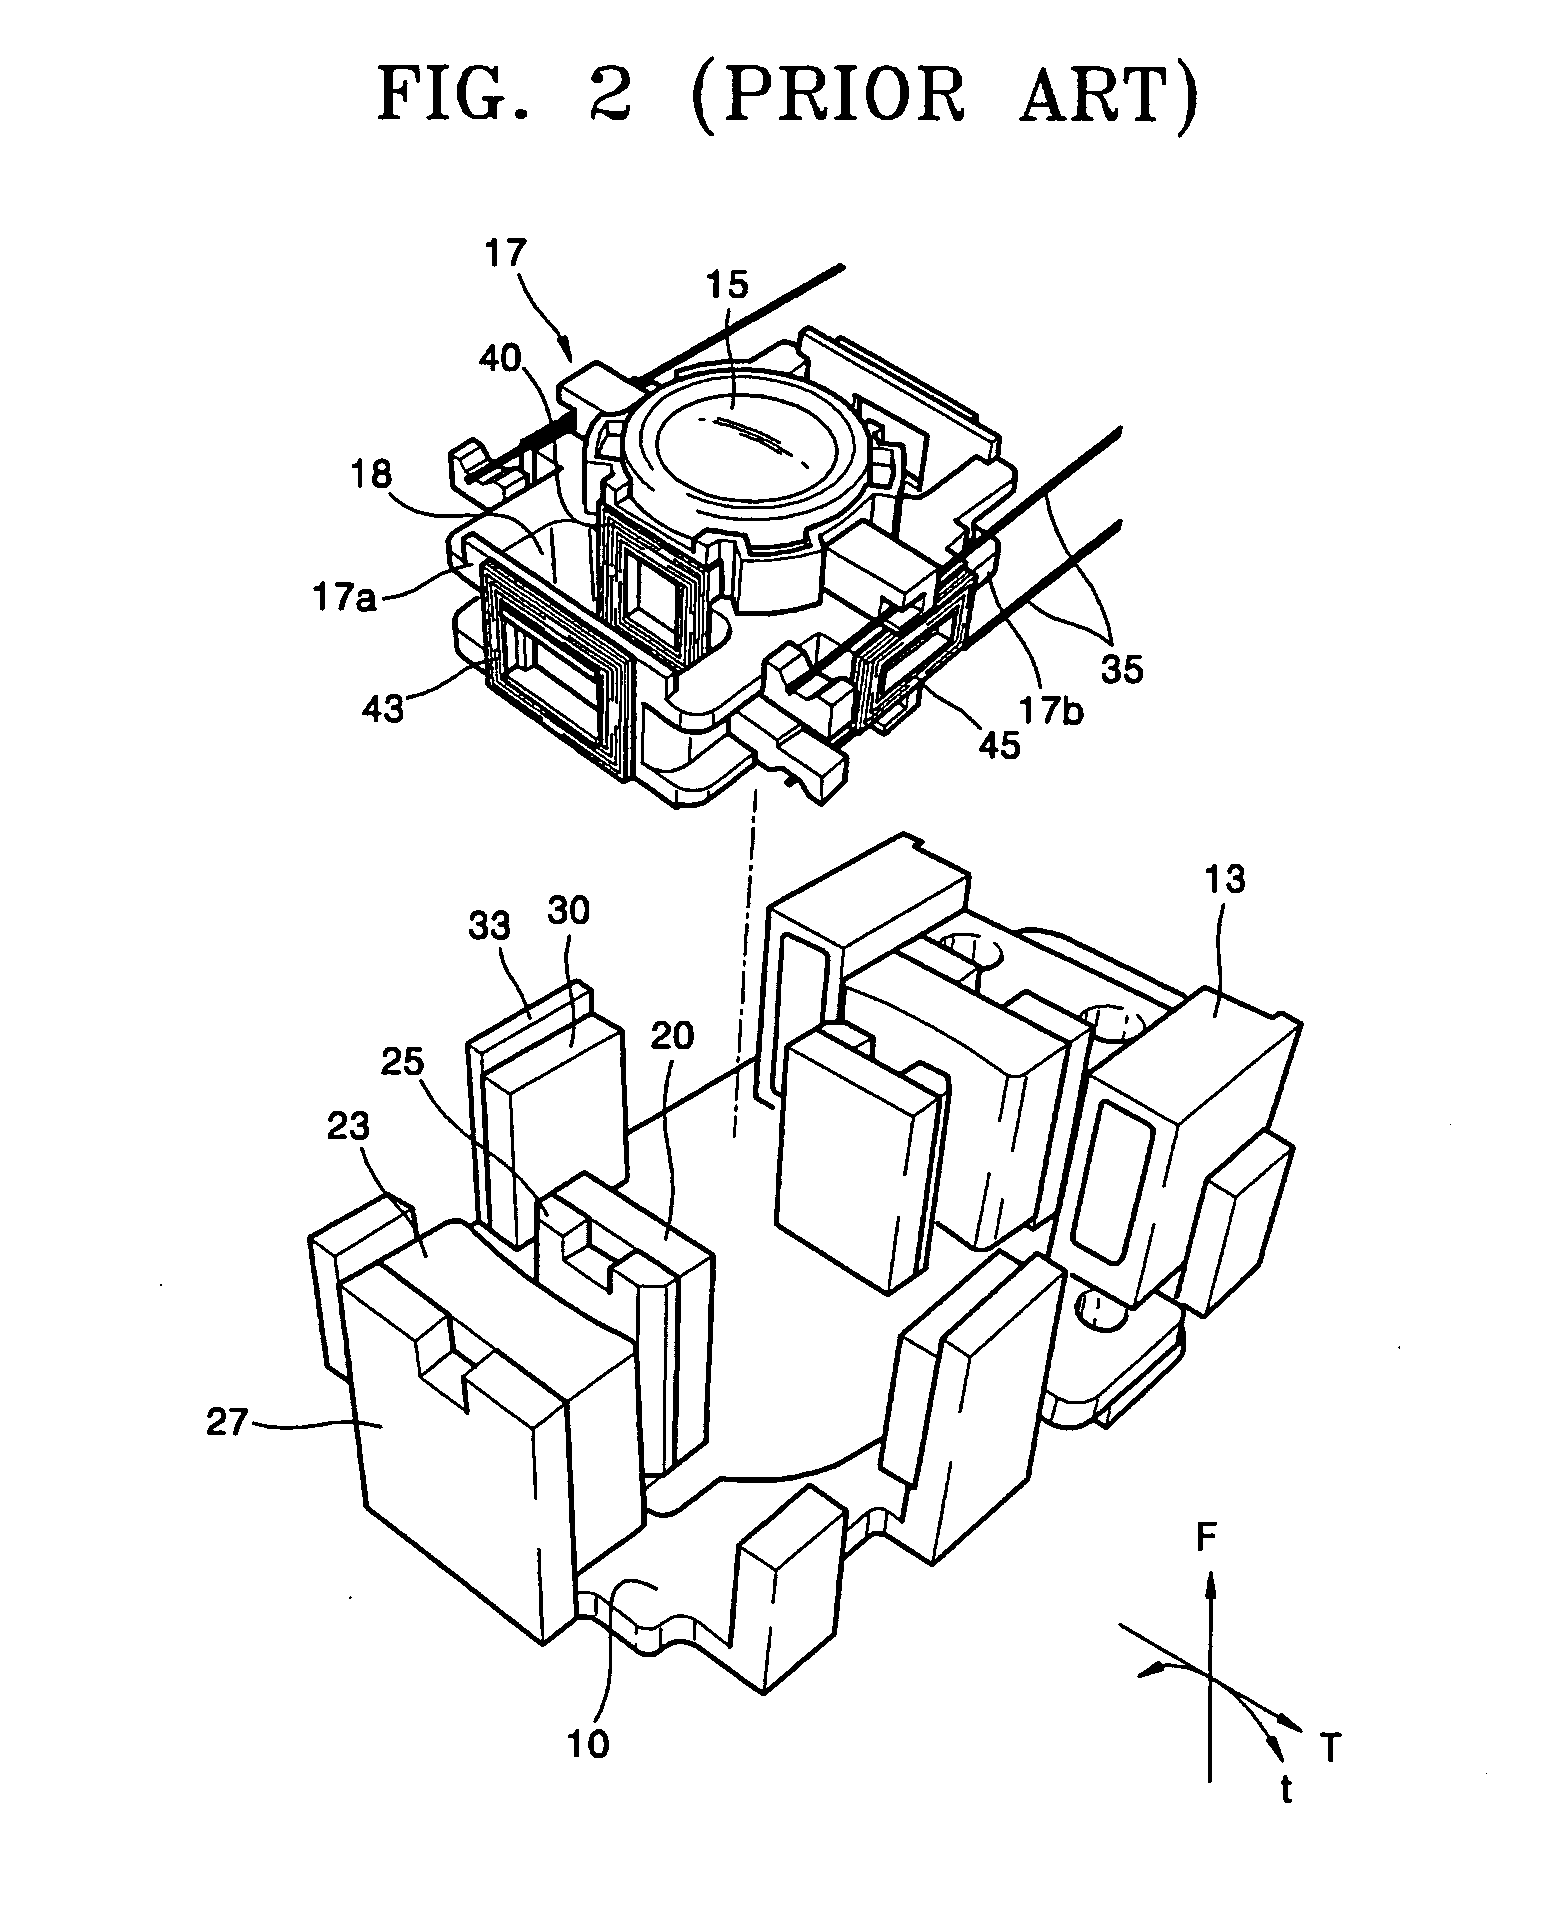 Recording and/or reproducing apparatus with optical pickup actuator, and methods for same